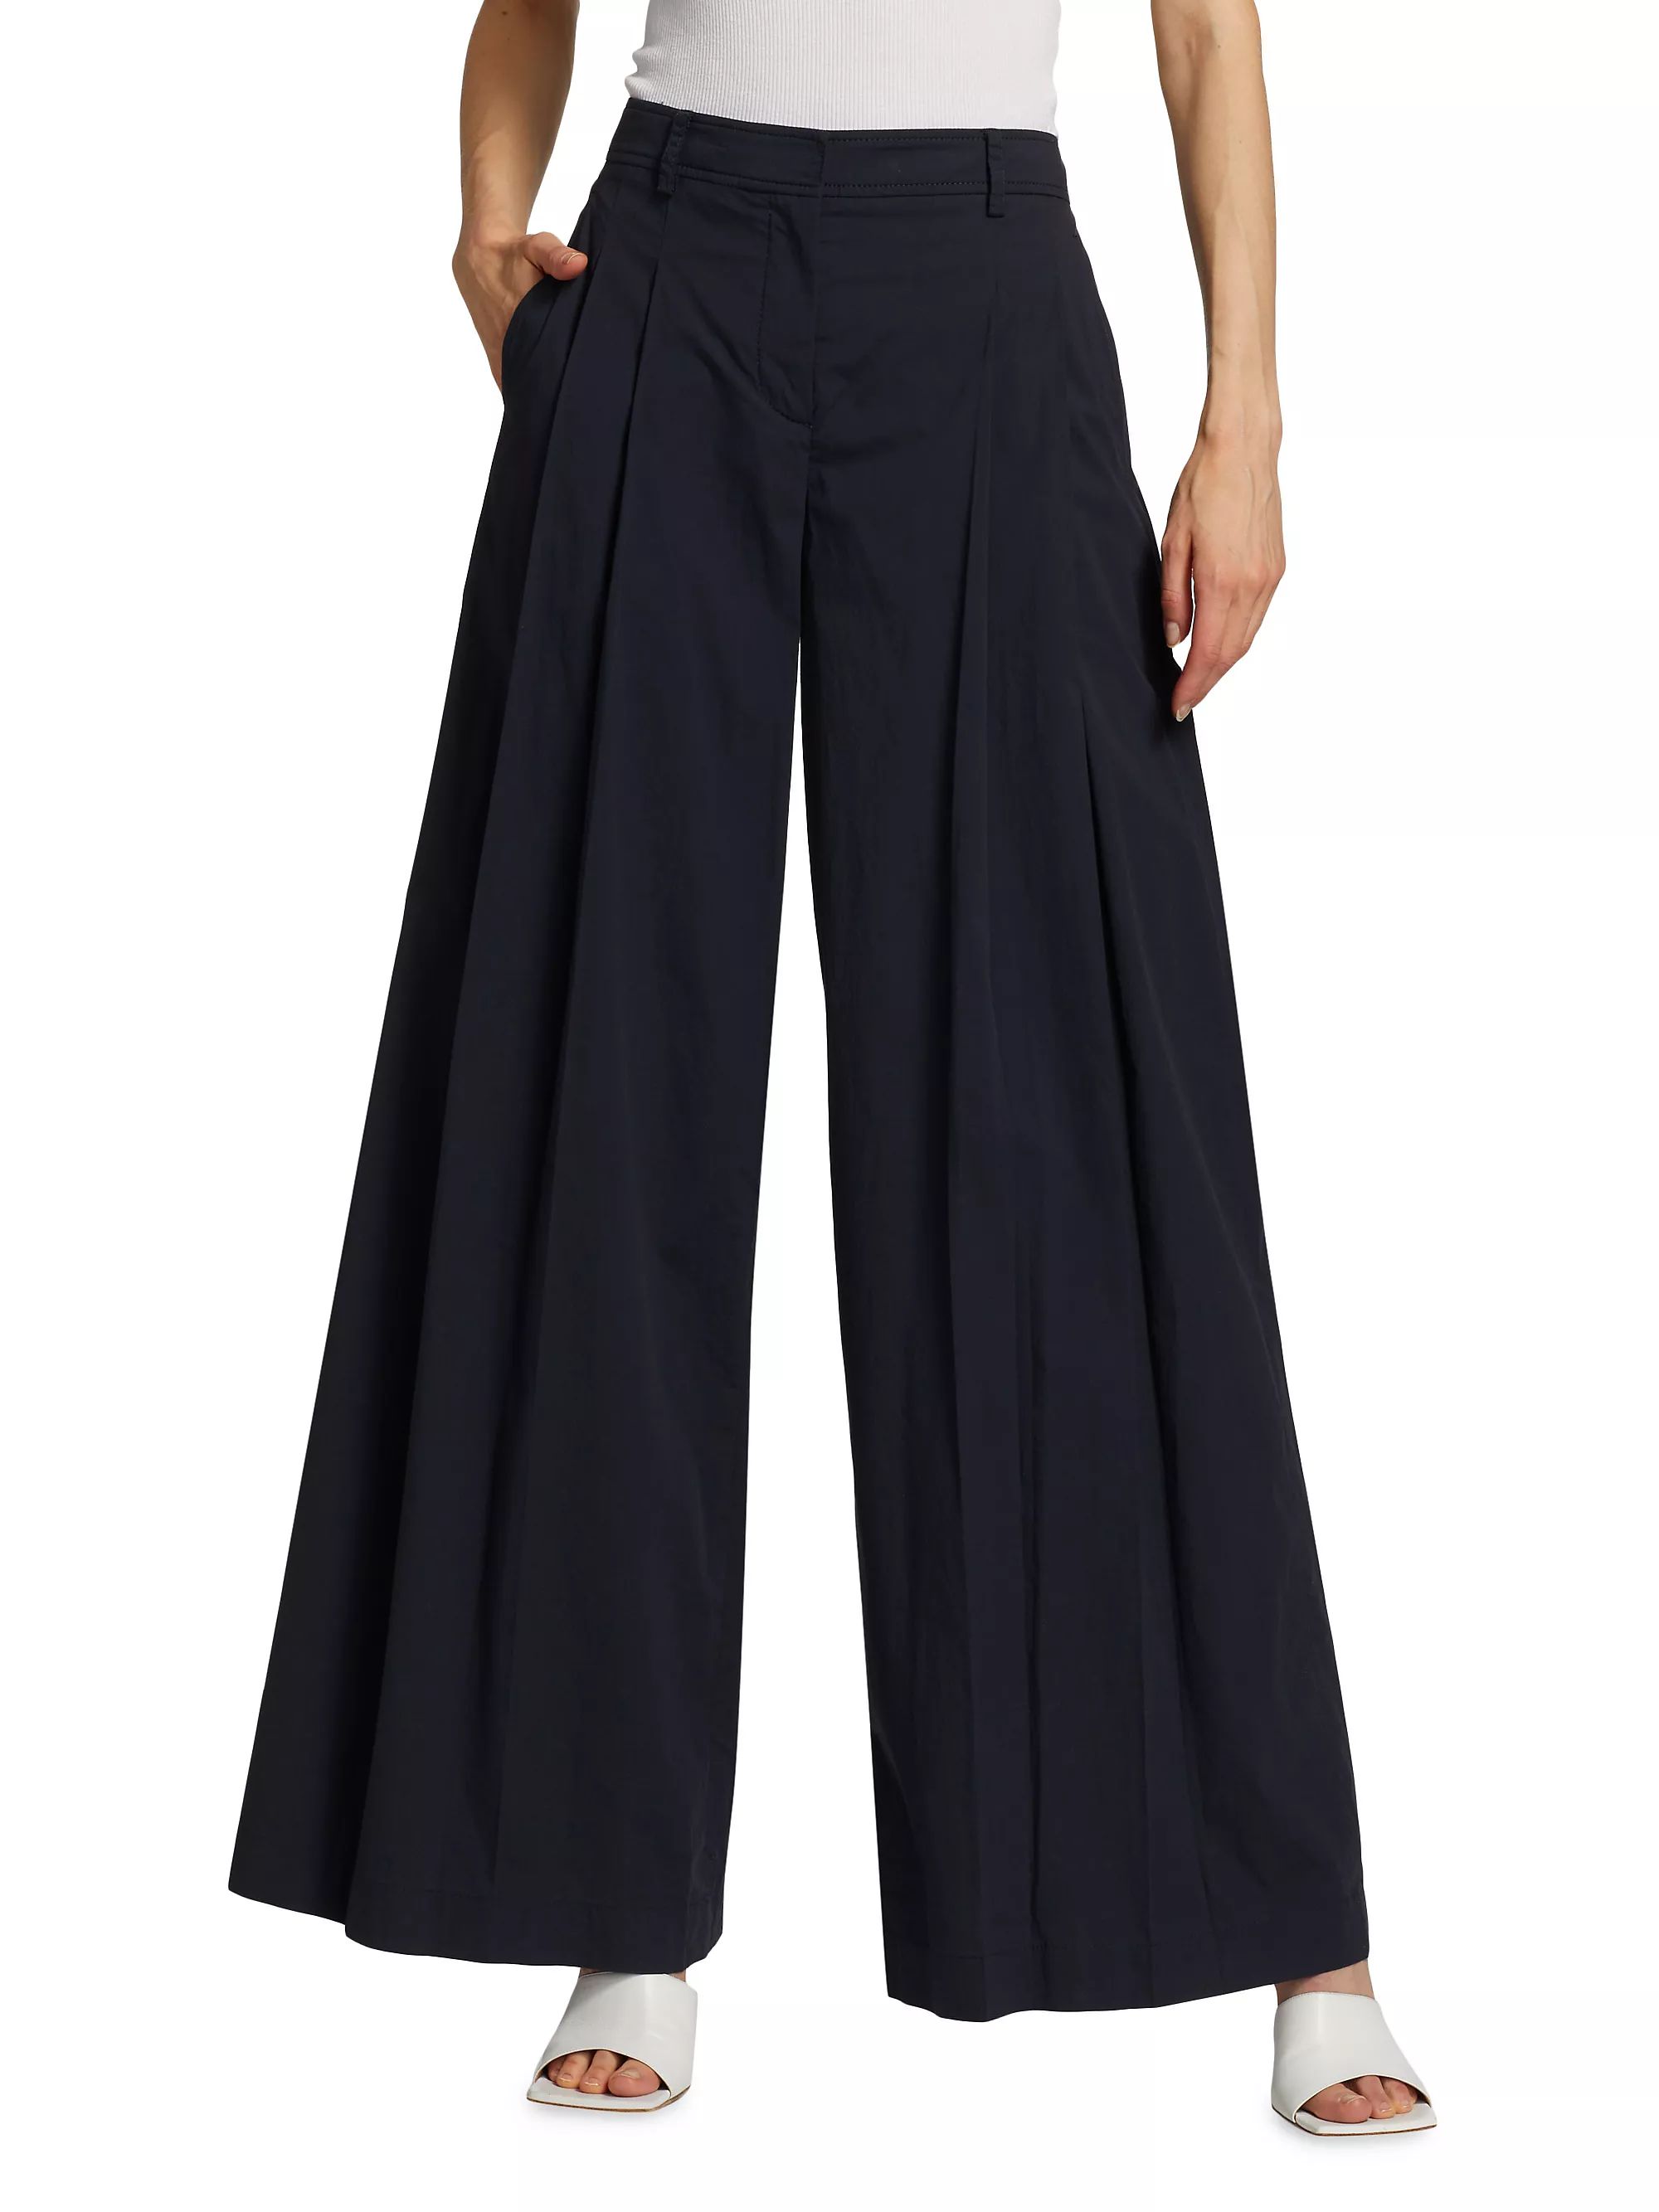 New Didi Cotton-Blend Trousers | Saks Fifth Avenue